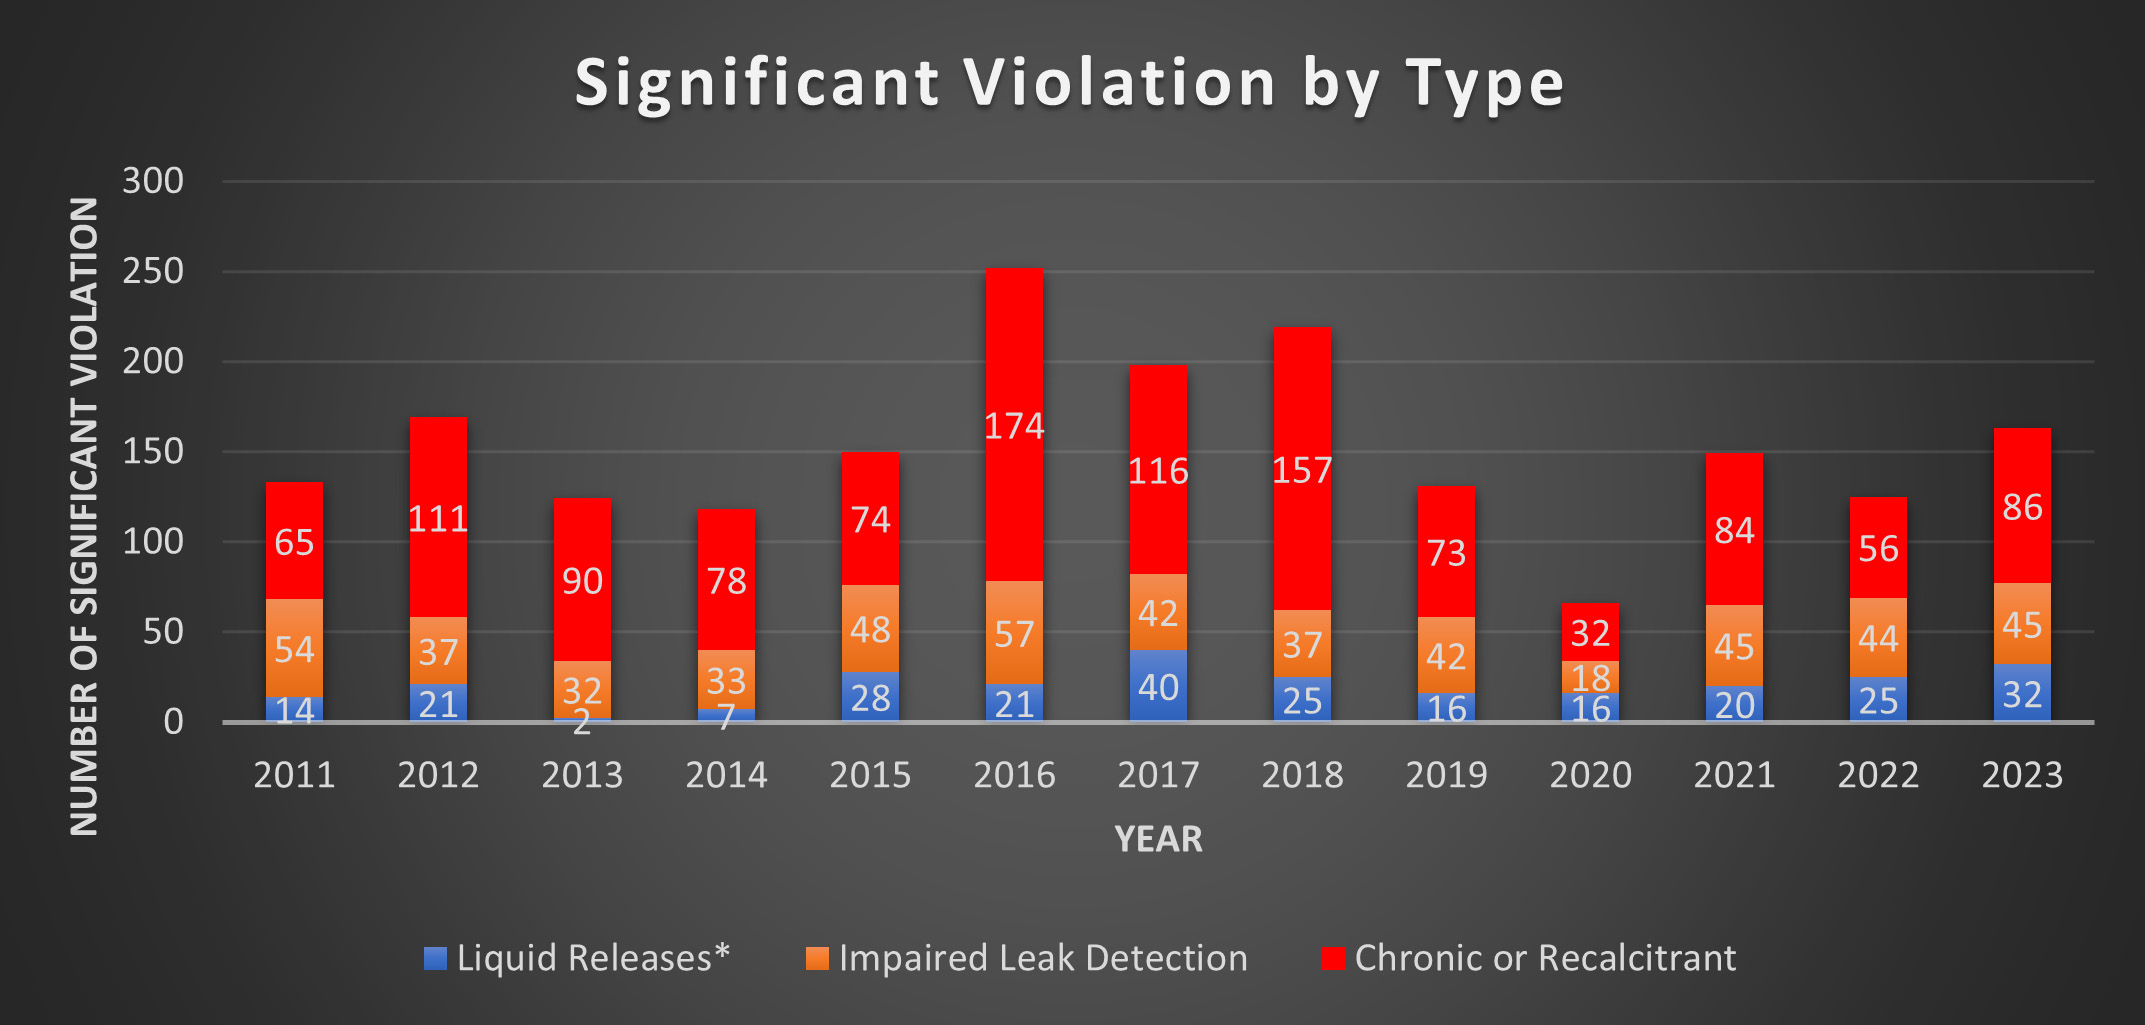 Same data as the table above Significant Violations by Type, in 2023